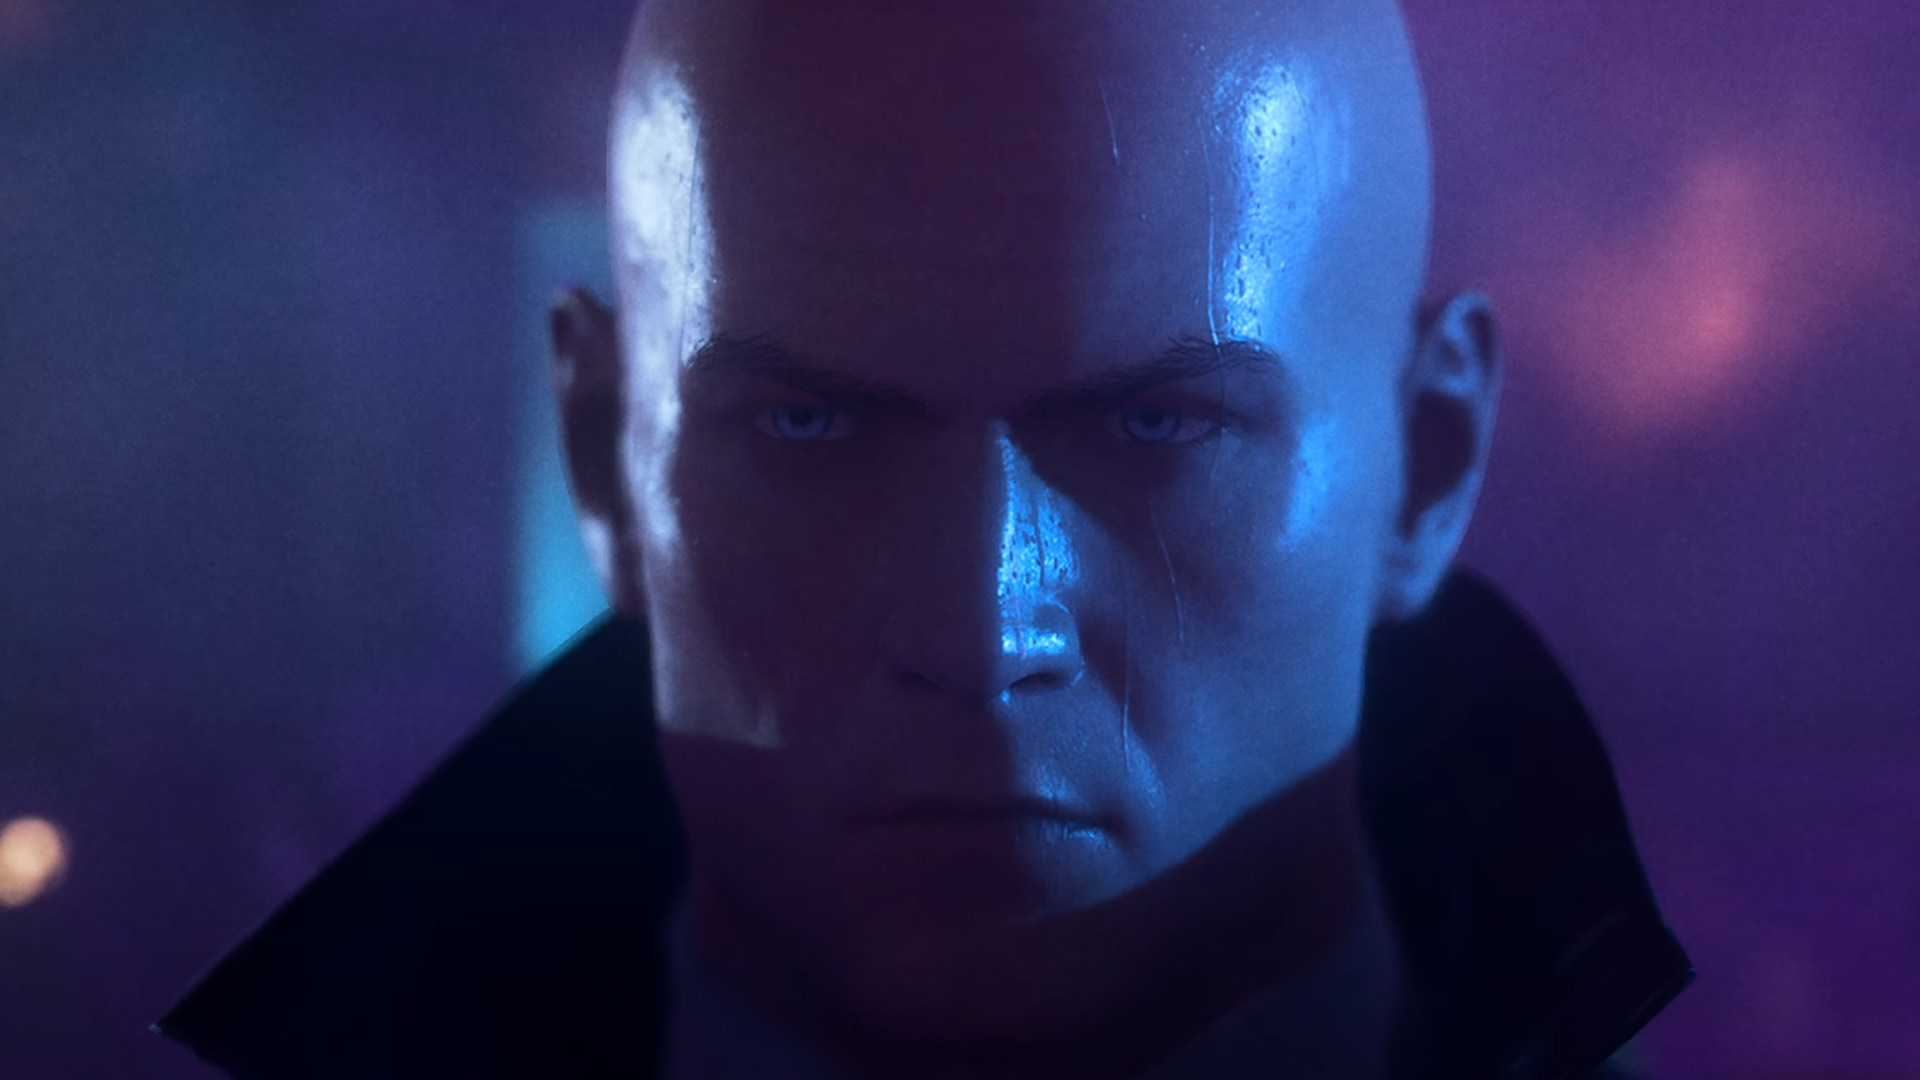 Hitman Absolution 3 wallpaper  Game wallpapers  11570